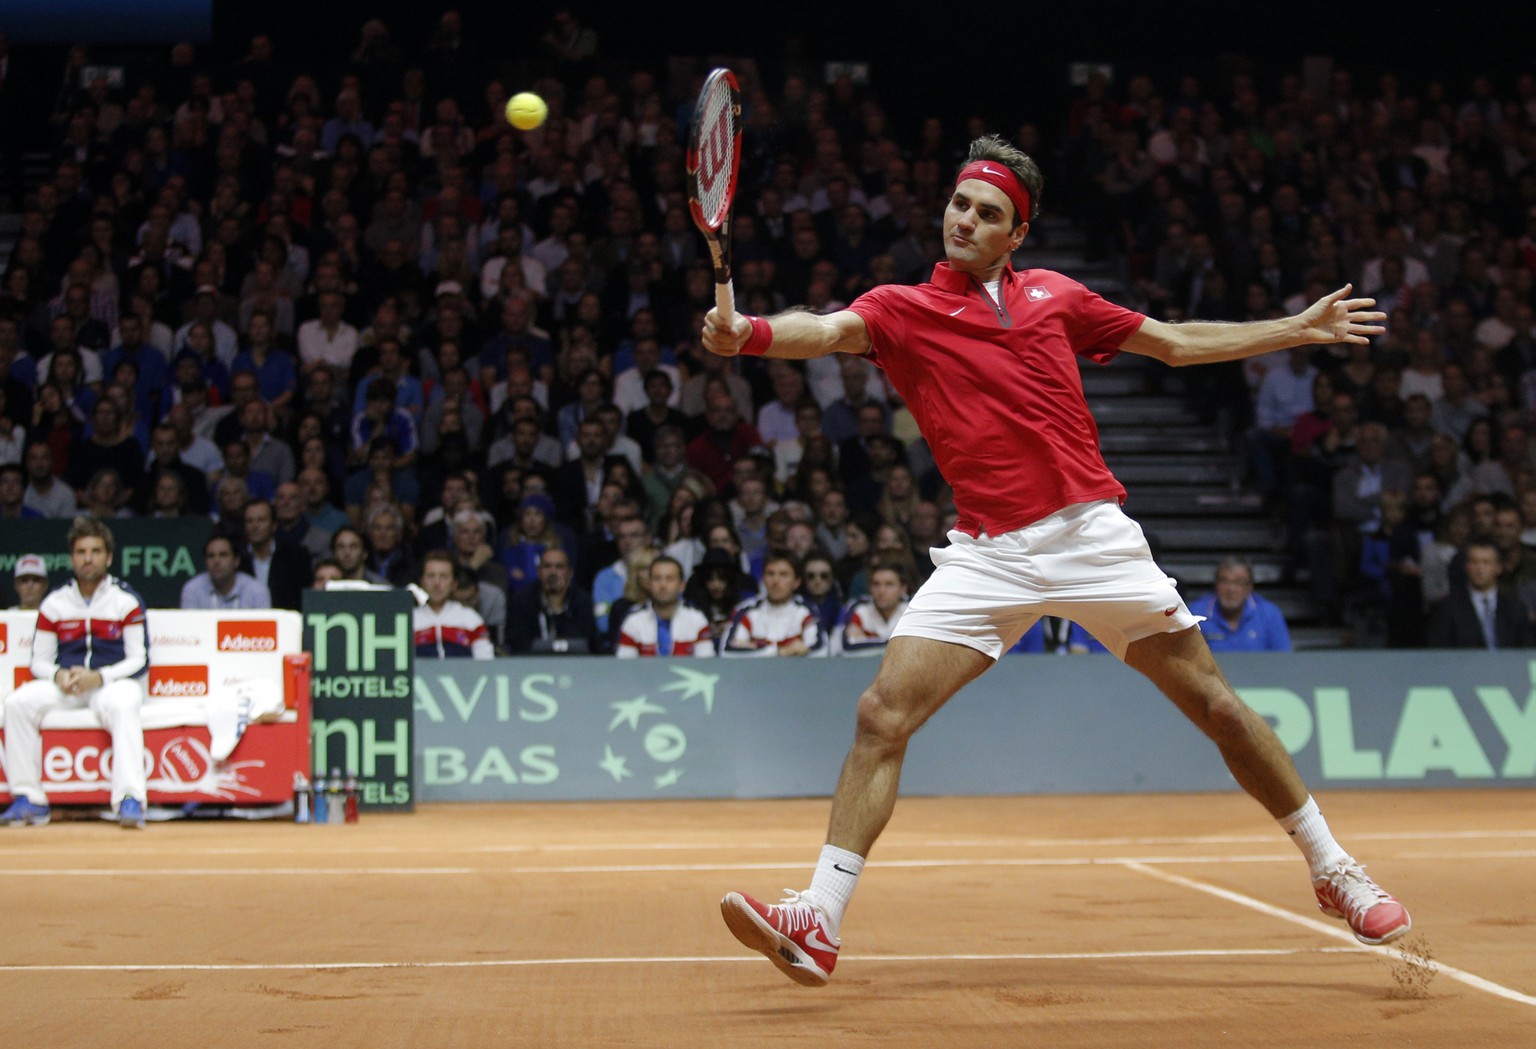 Switzerland&#039;s Roger Federer volleys the ball to France&#039;s Gael Monfils during the Davis Cup final in Lille, northern France, Friday, Nov.21, 2014. (AP Photo/Christophe Ena)